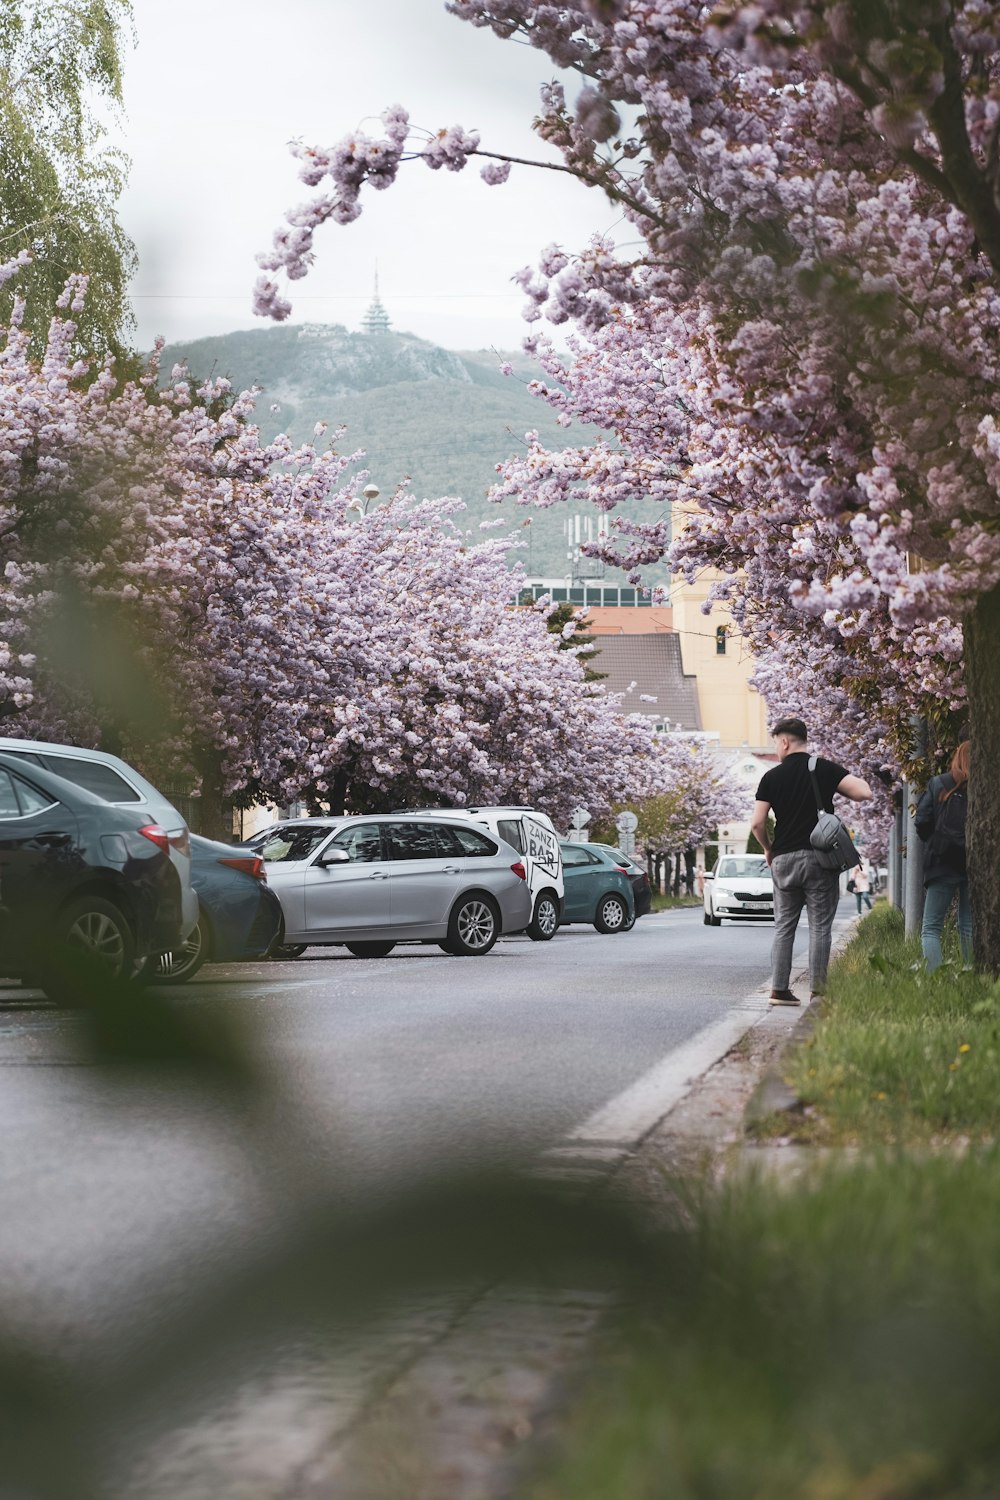 a person walking down a street with cars and flowering trees